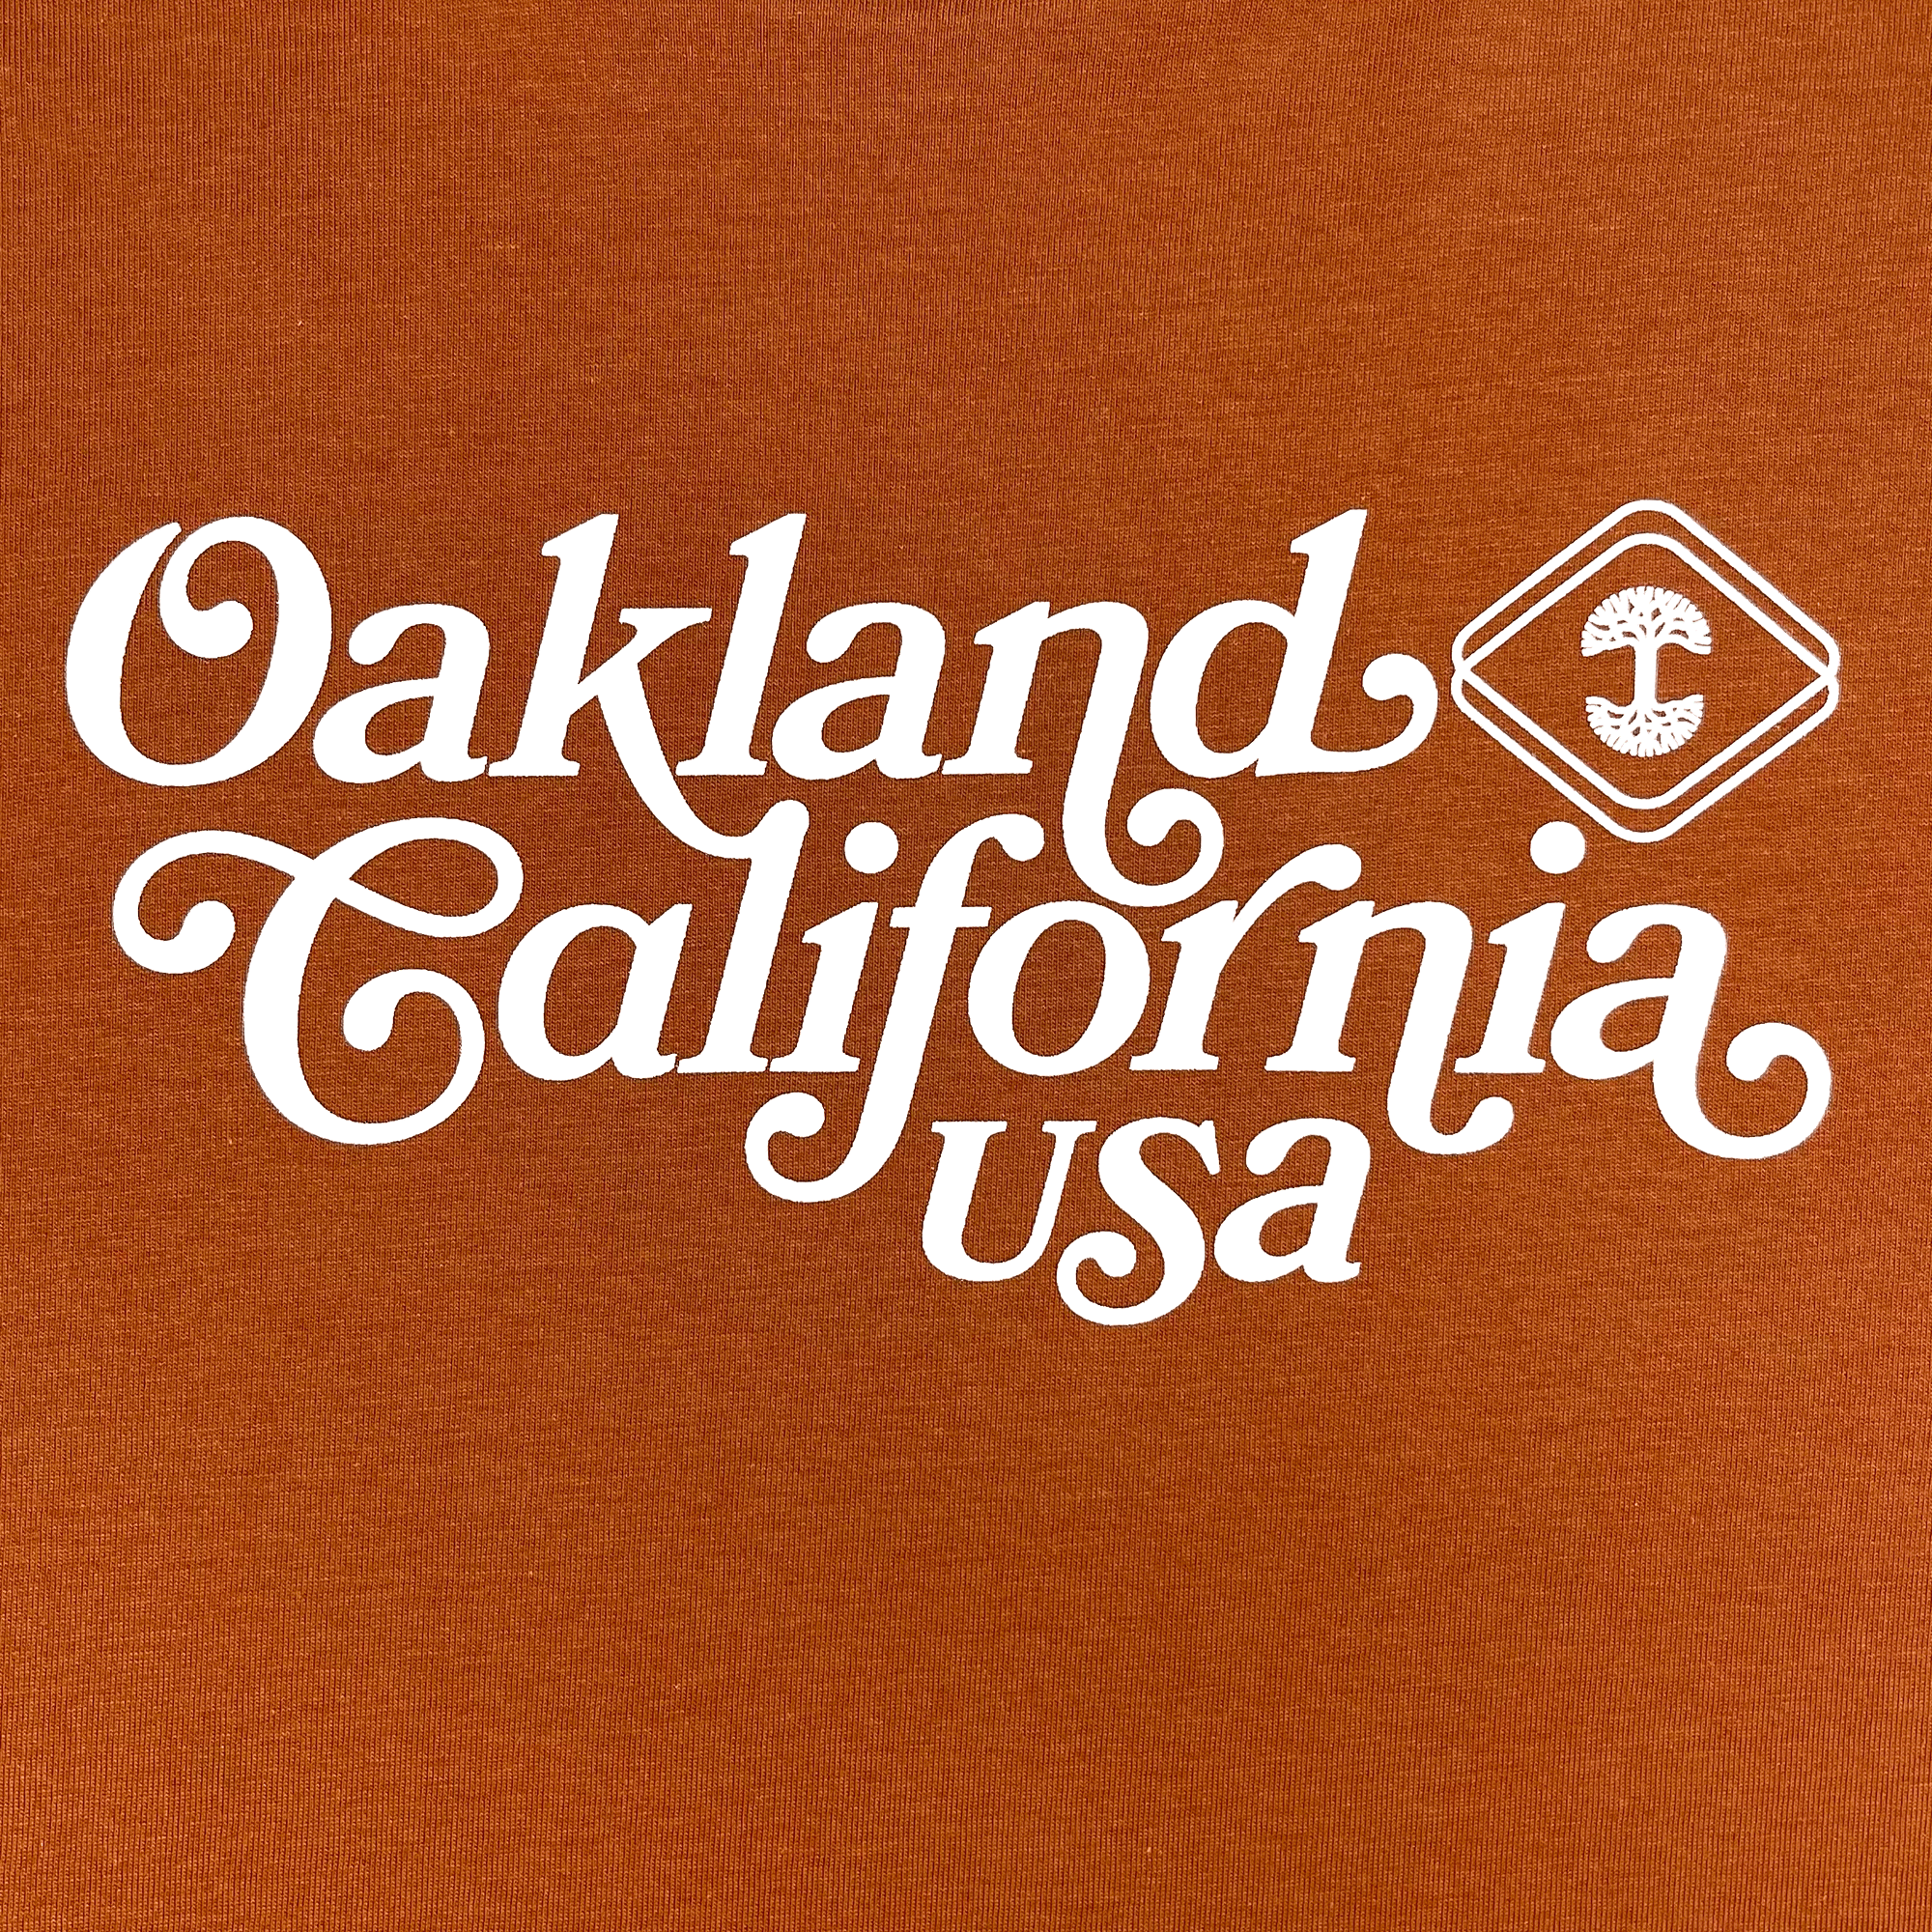 Close-up of Oakland, California, USA graphic in cursive and Oaklandish logo on a red clay-colored t-shirt.